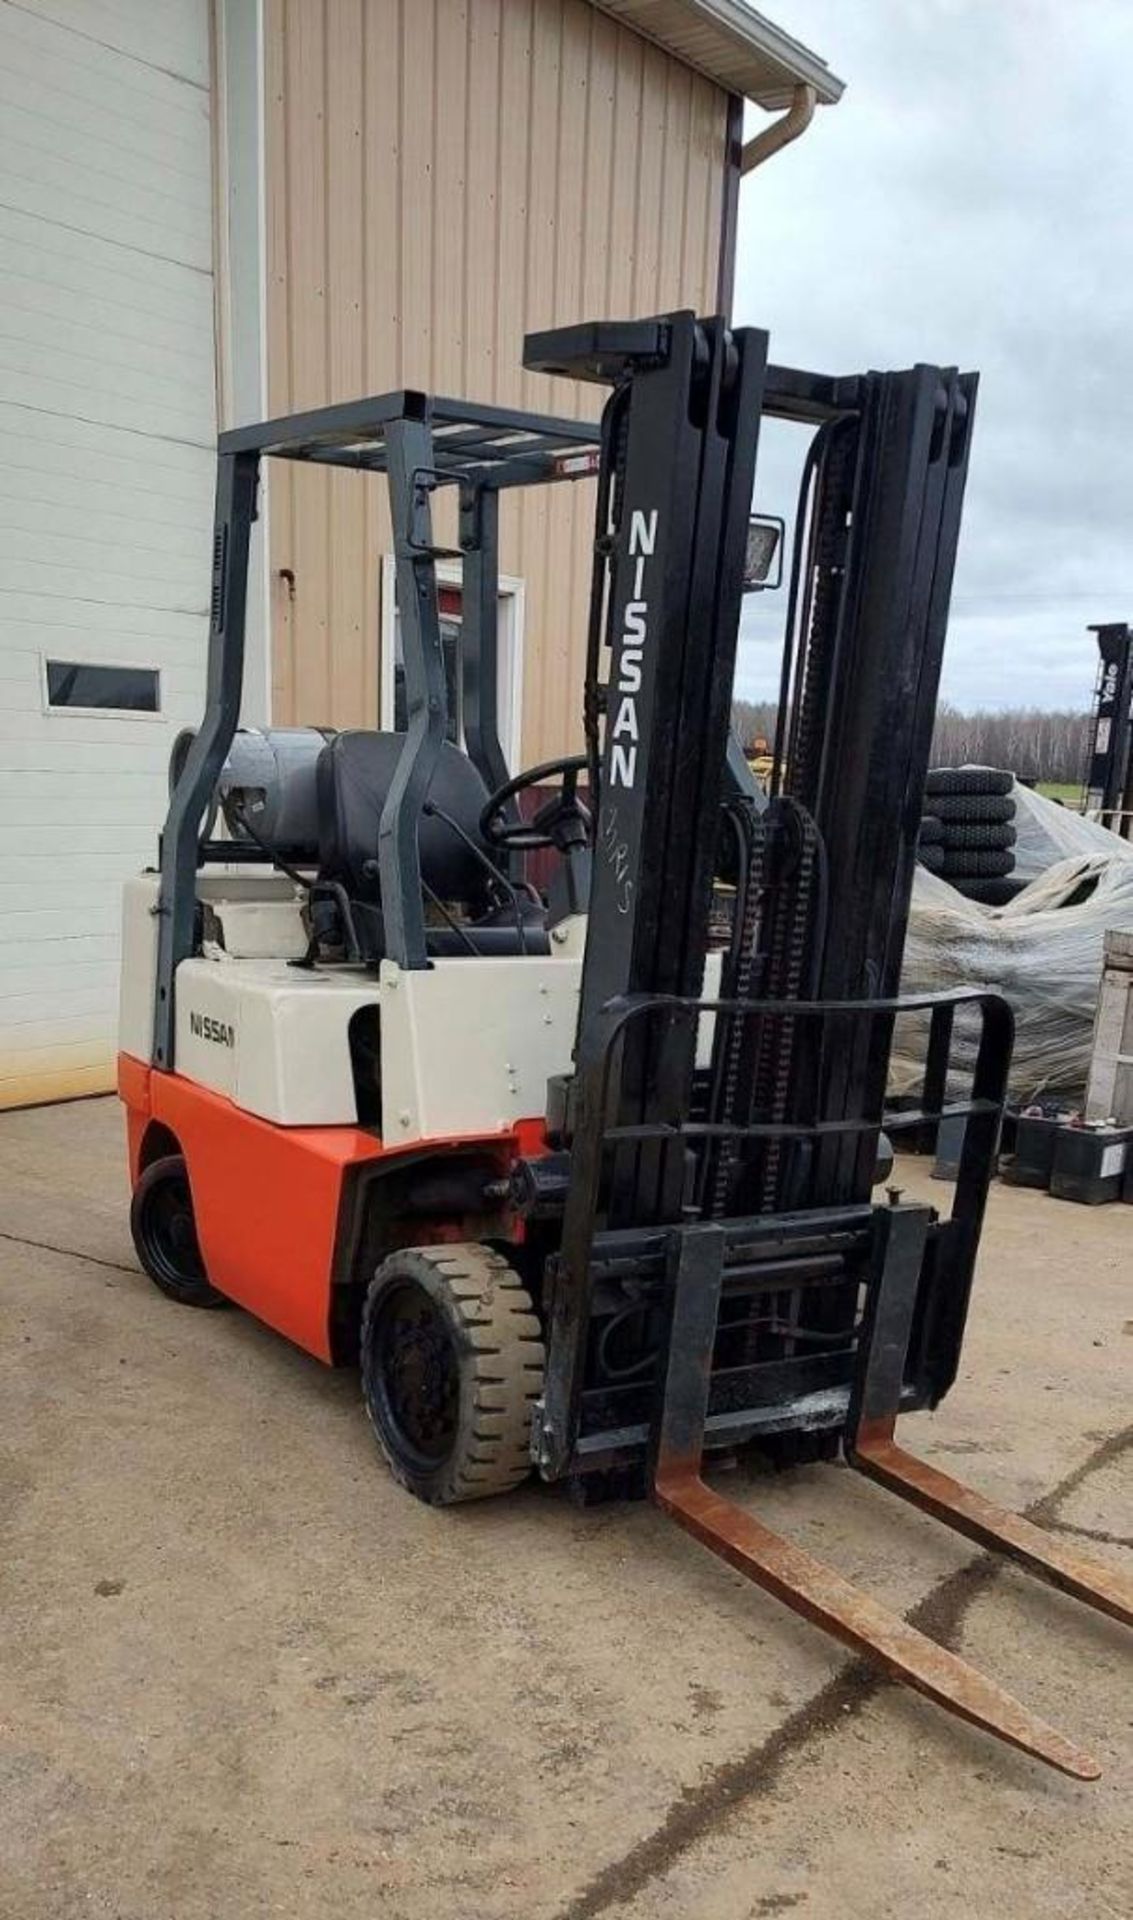 Nissan 5,000-lb. Capacity Forklift, Model: CPJ02A-25P, S/N: CPJ02-9P8278, LPG, Solid Tires, 3-Stage - Image 2 of 4